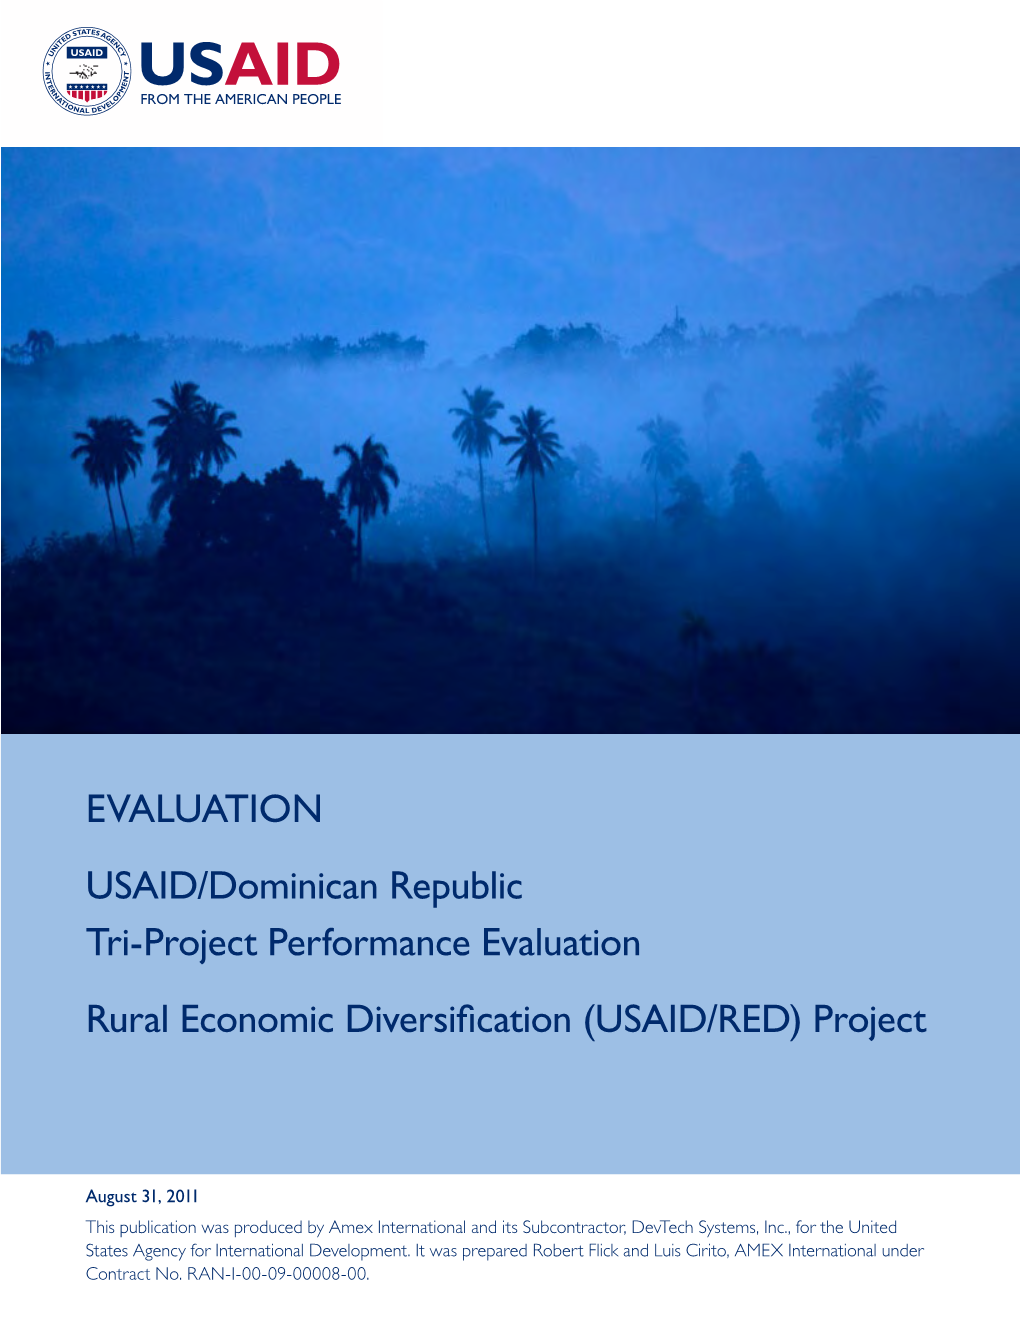 USAID/Dominican Republic Tri-Project Performance Evaluation Rural Economic Diversification (USAID/RED) Project